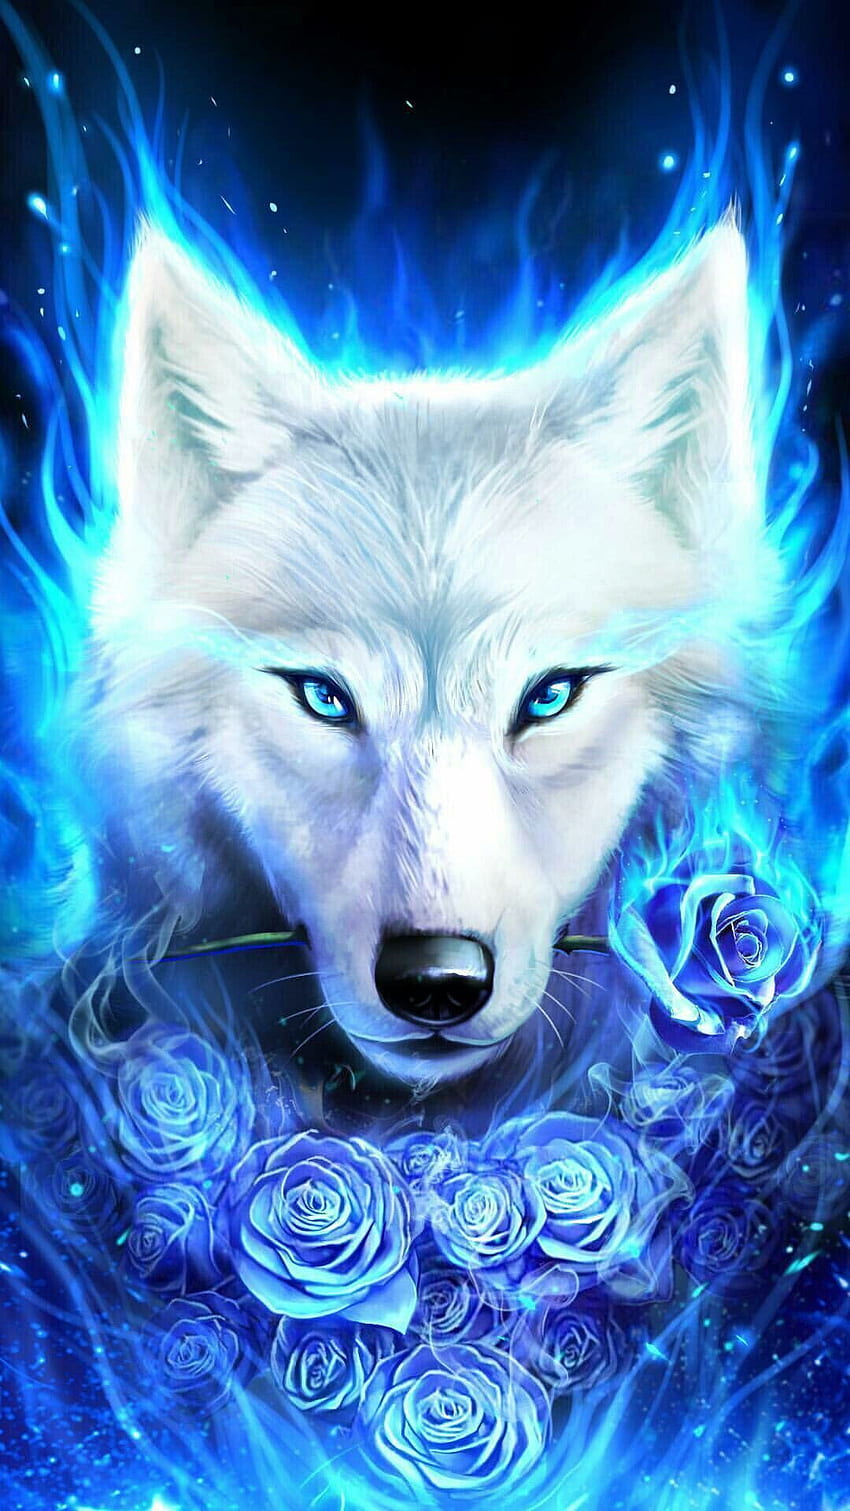 Ananyadesigns Anime wolfwhite Wallposter Paper Print  Animation   Cartoons posters in India  Buy art film design movie music nature and  educational paintingswallpapers at Flipkartcom